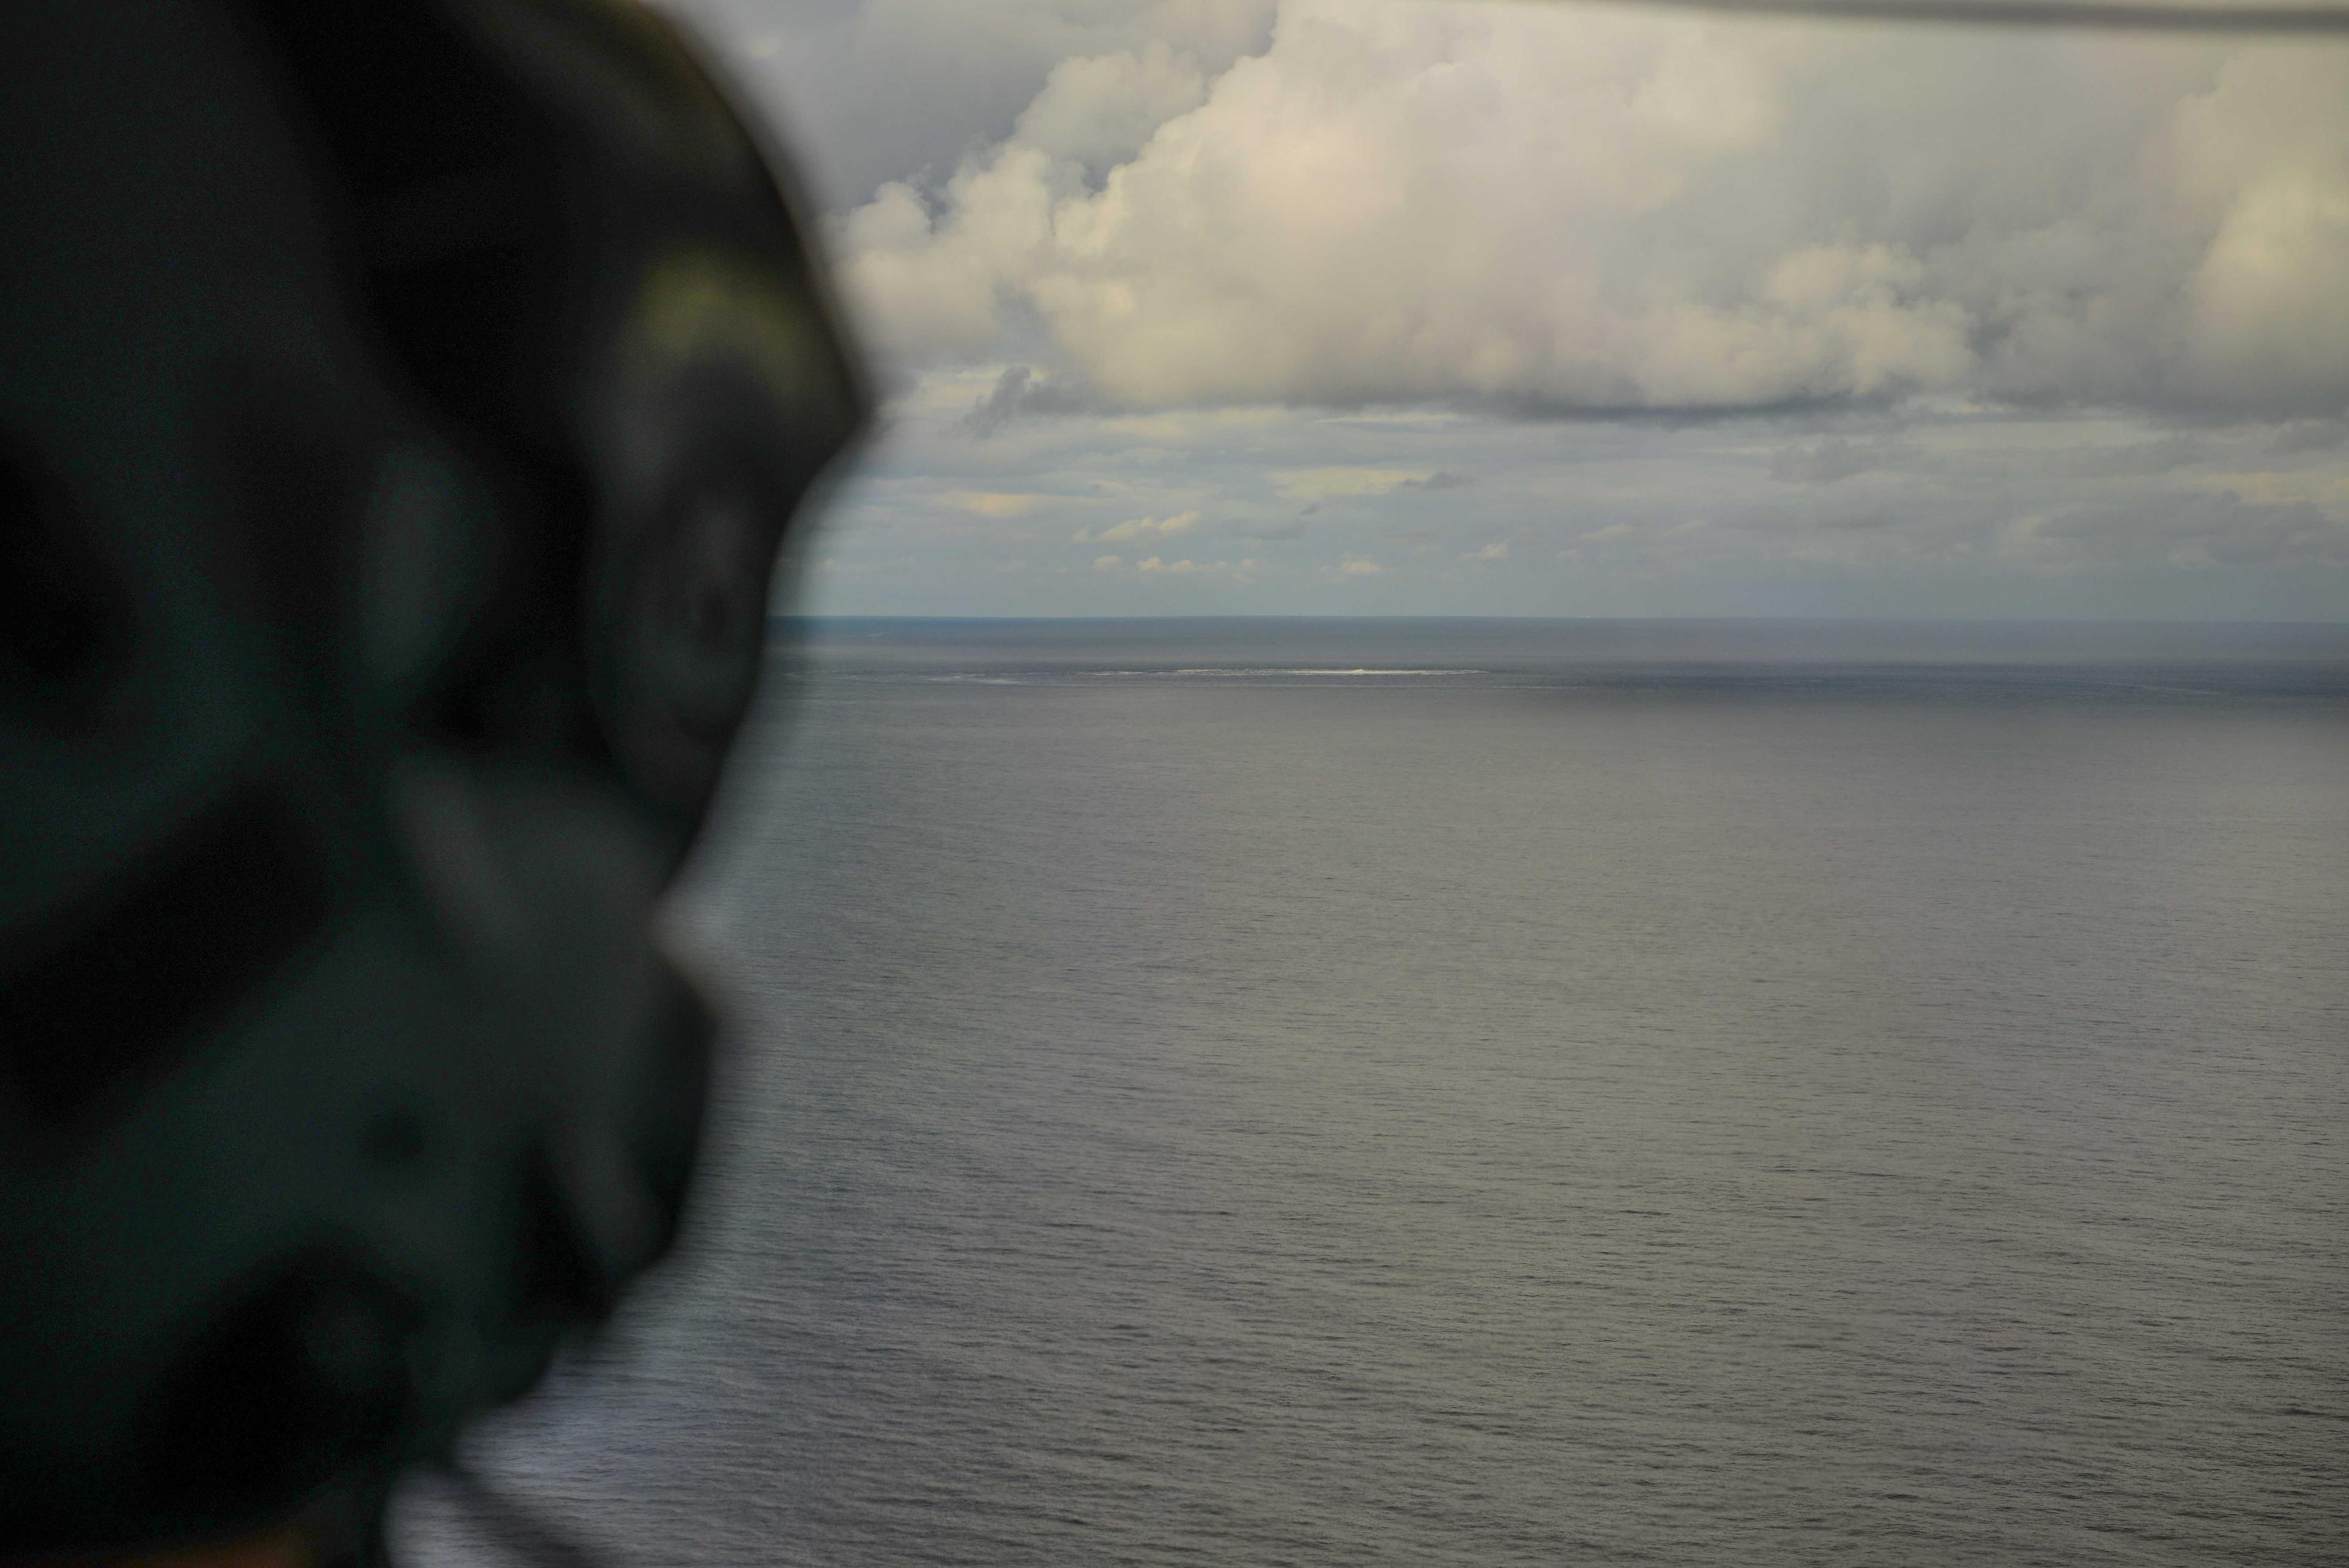 Air crew on board a Danish defence aircraft monitor Nord Stream gas leak at mid-sea over the Baltic Sea off the coast of Denmark Sept 30. Photo: Reuters